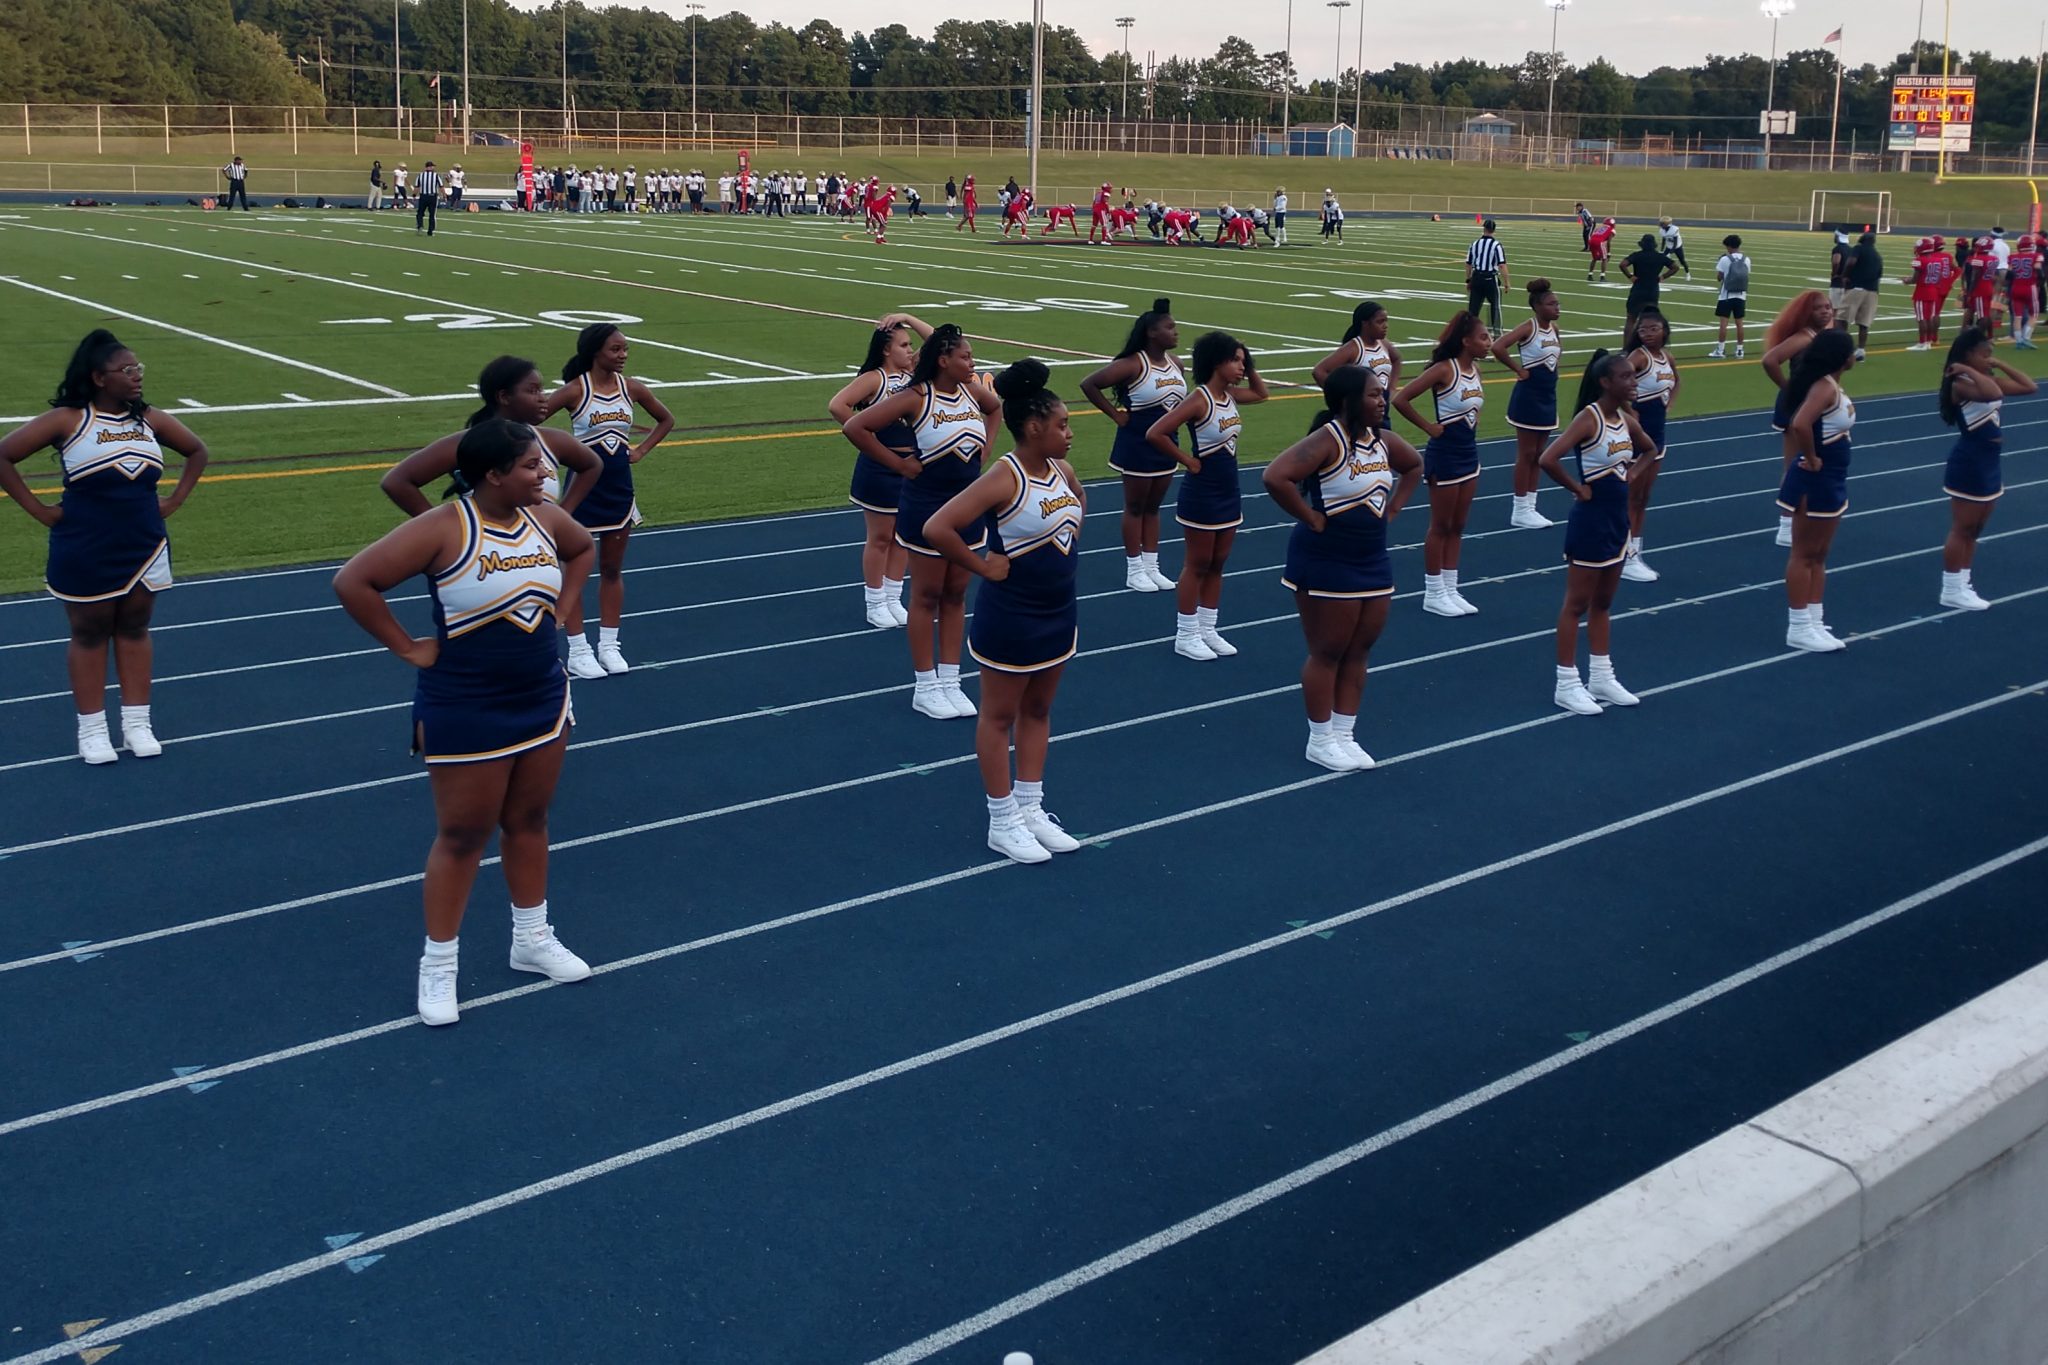 The cheer team performing outside during a football game